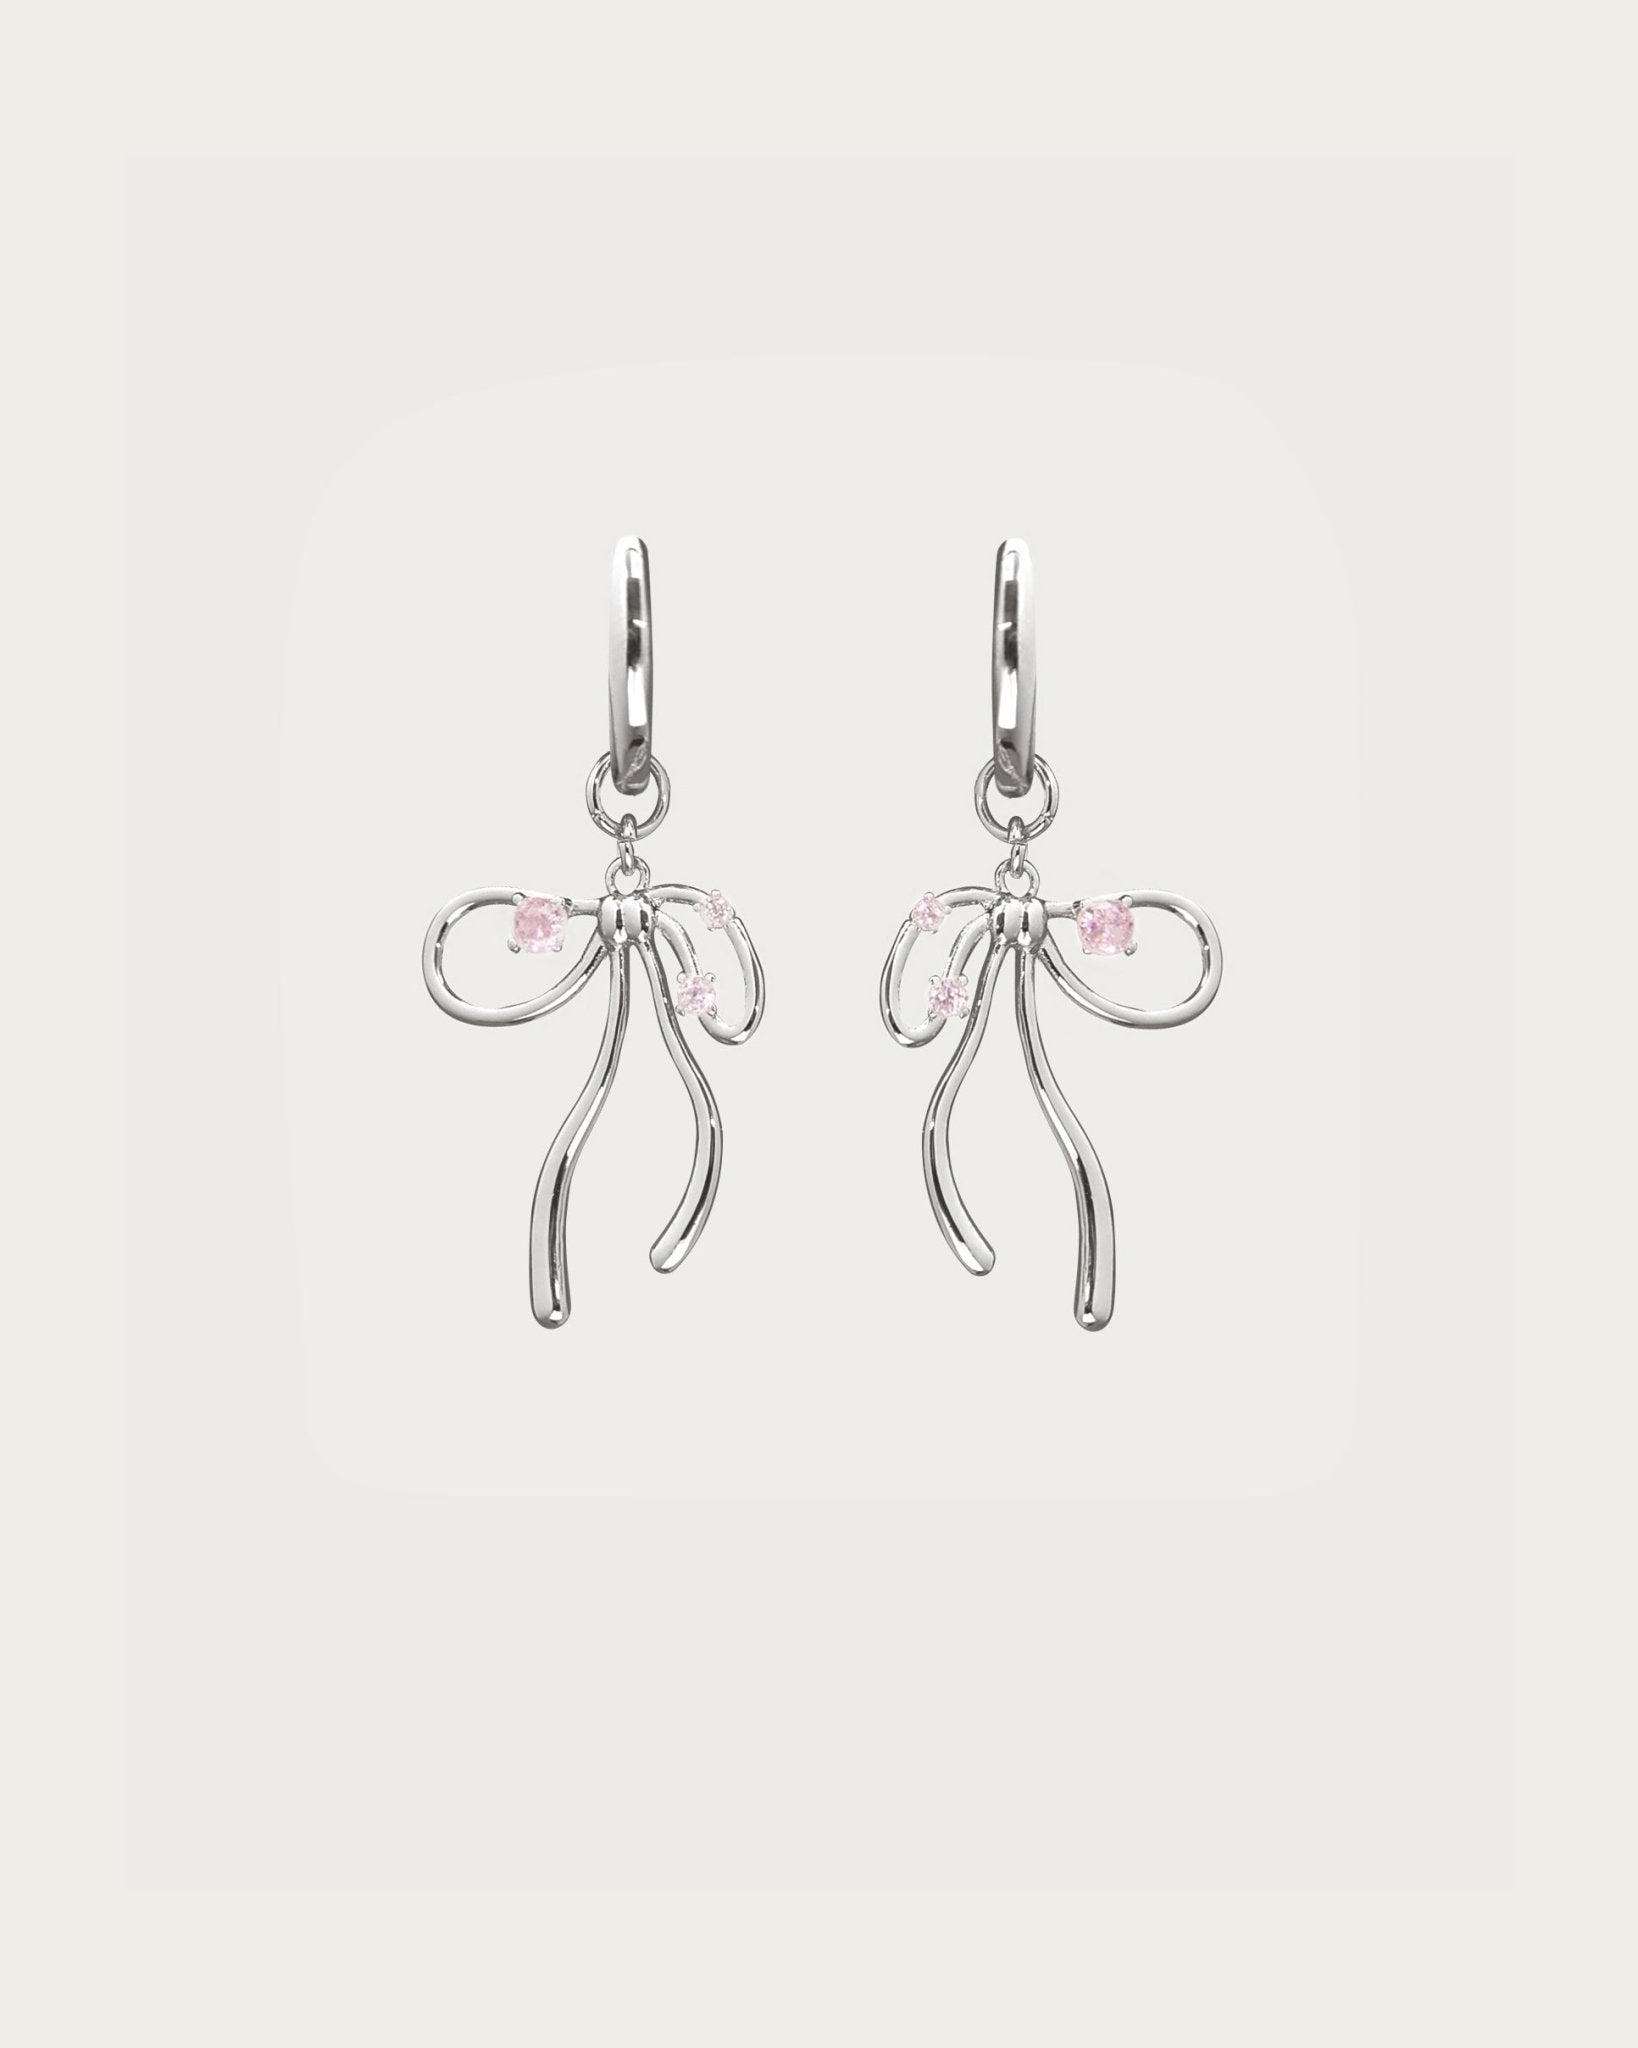 The Miffy Des boucles d'oreilles in Pink Silver